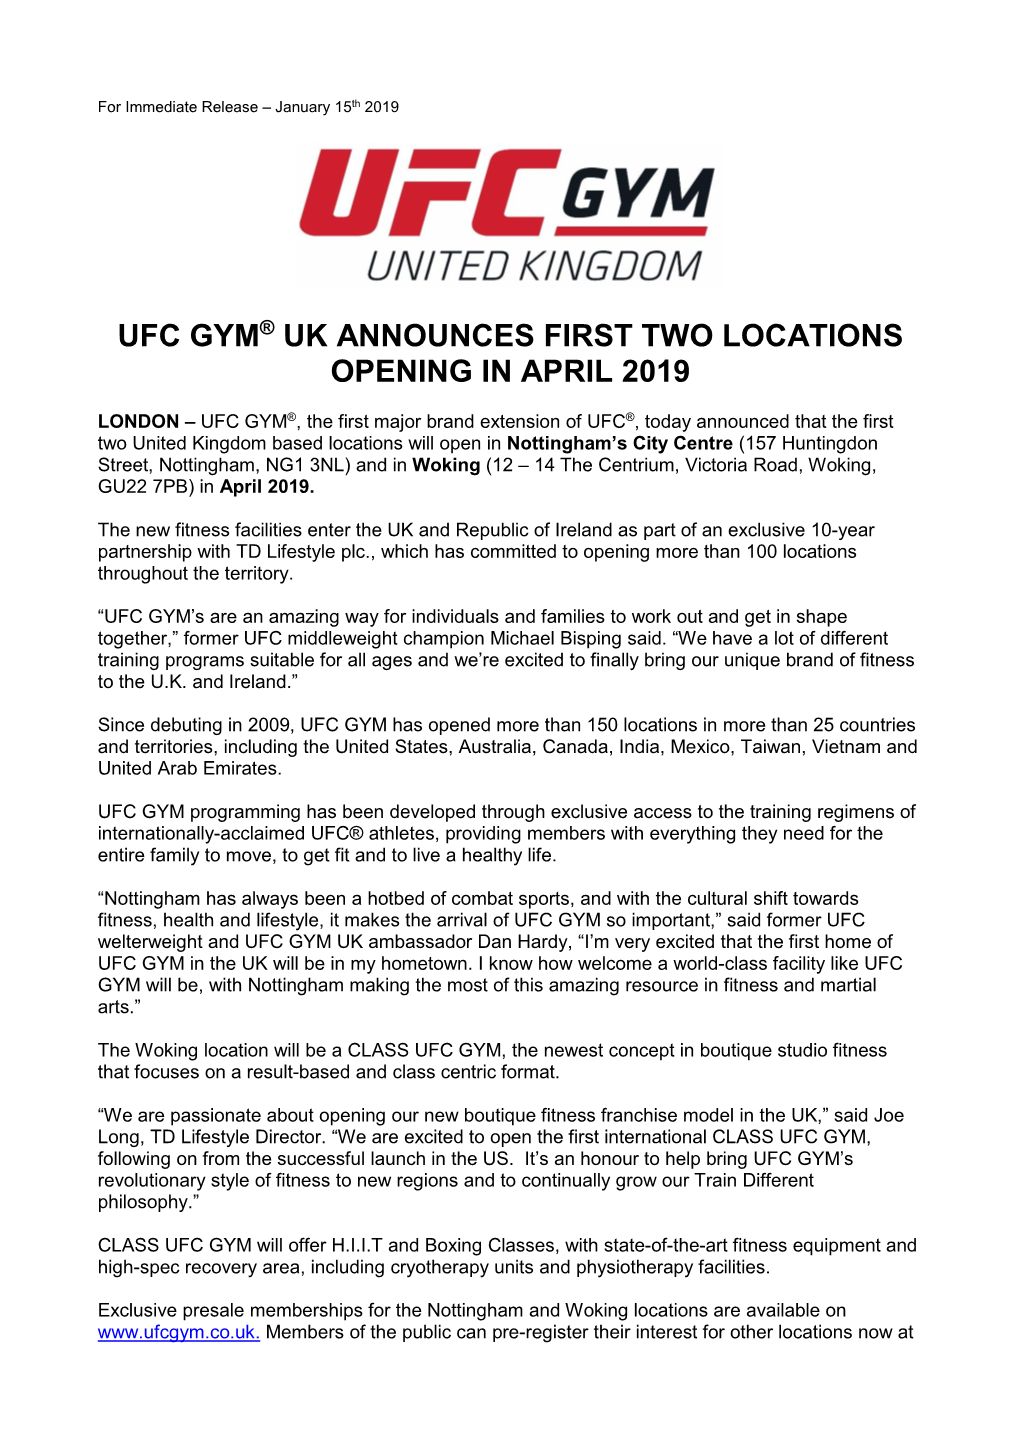 Ufc Gym® Uk Announces First Two Locations Opening in April 2019